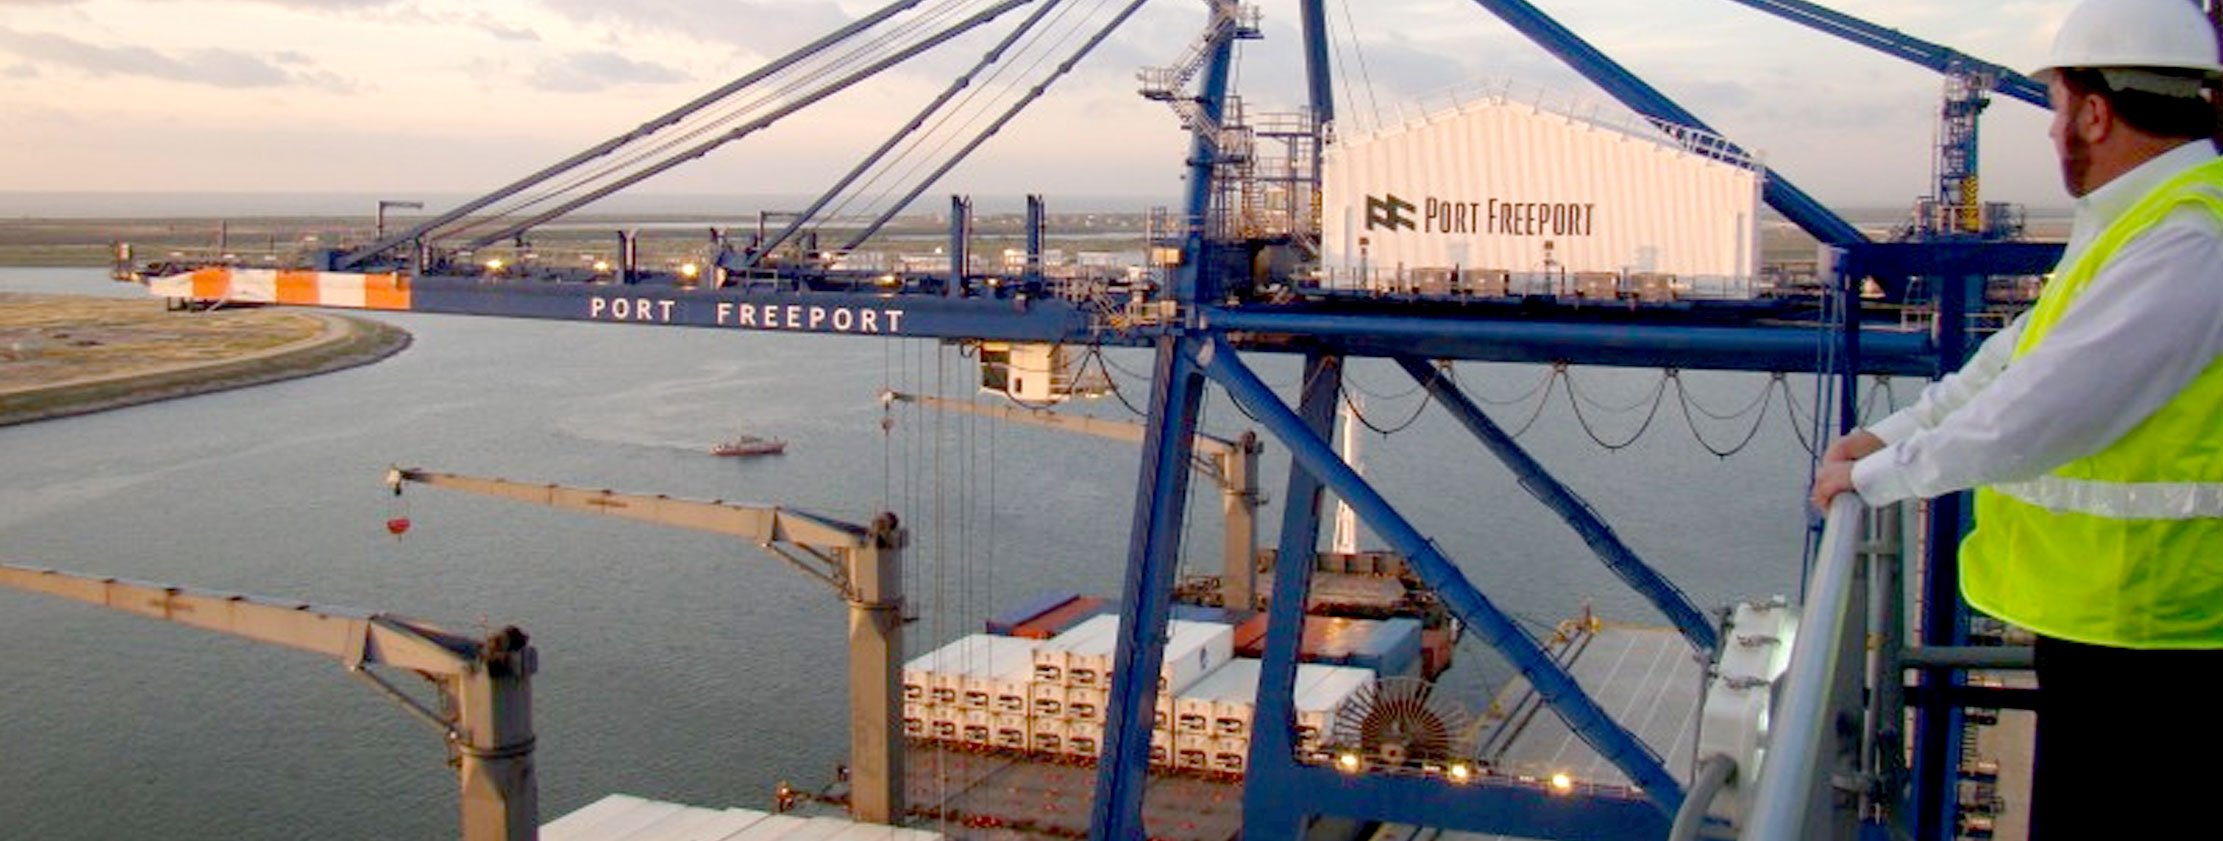 port freeport container operations in action